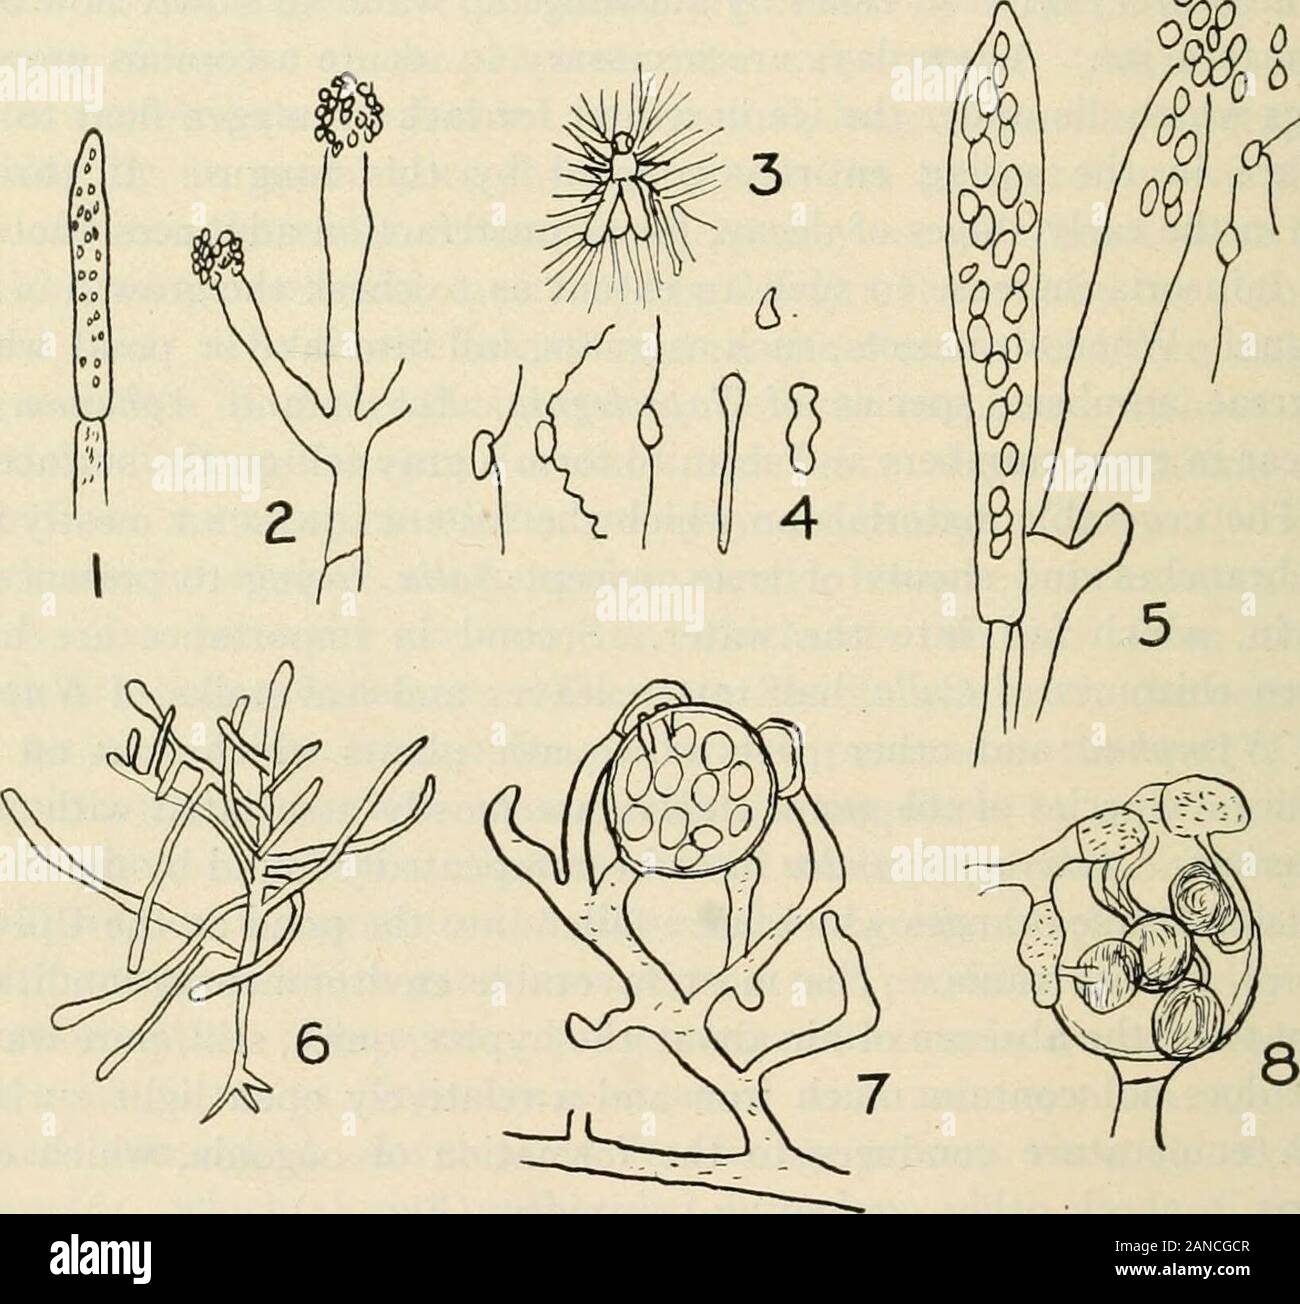 A text-book of mycology and plant pathology . 35). Family 3. Peronosporace.^.—This family is rich in parasiticforms which may be accounted as the cause of important diseases ofcultivated plants. The hyphte of the mycelia are irregularly and copi-ously branched and are found mainly in the intercellular spaces of thehost tissue sending short branches called haustoria into the adjoiningliving cells. These haustoria maybe glohvXax {Albugo = Cystopiis),club-shaped (Peronospora corydalis), branched (Plasmopara) (Fig. 36),or branched and snarled (Peronospora). Septa are absent except 1 Petersen, Henn Stock Photo